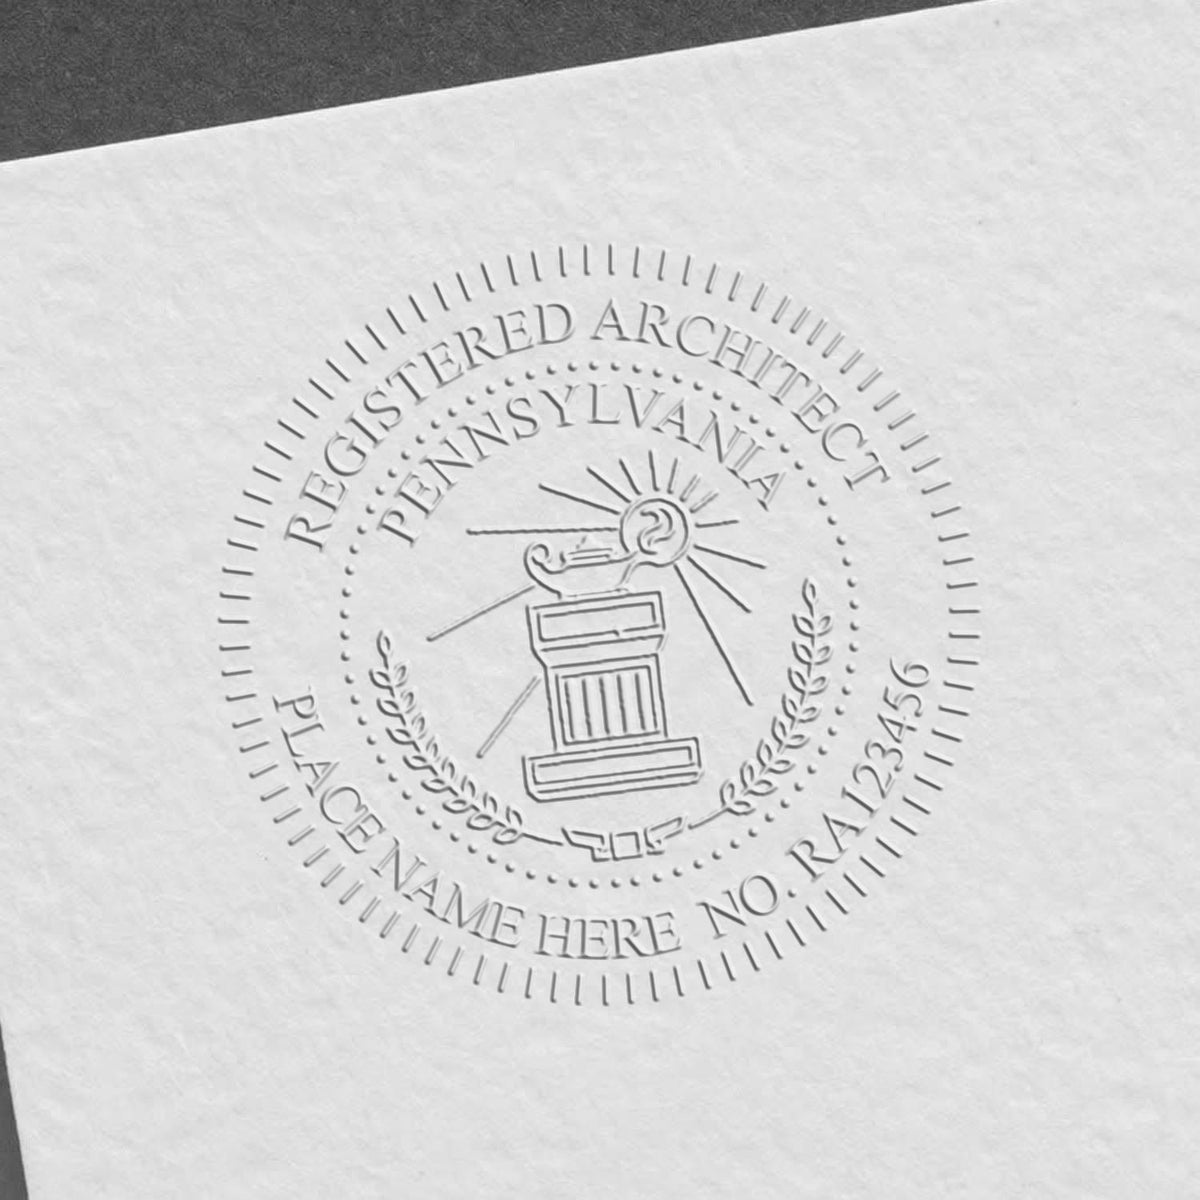 The State of Pennsylvania Long Reach Architectural Embossing Seal stamp impression comes to life with a crisp, detailed photo on paper - showcasing true professional quality.